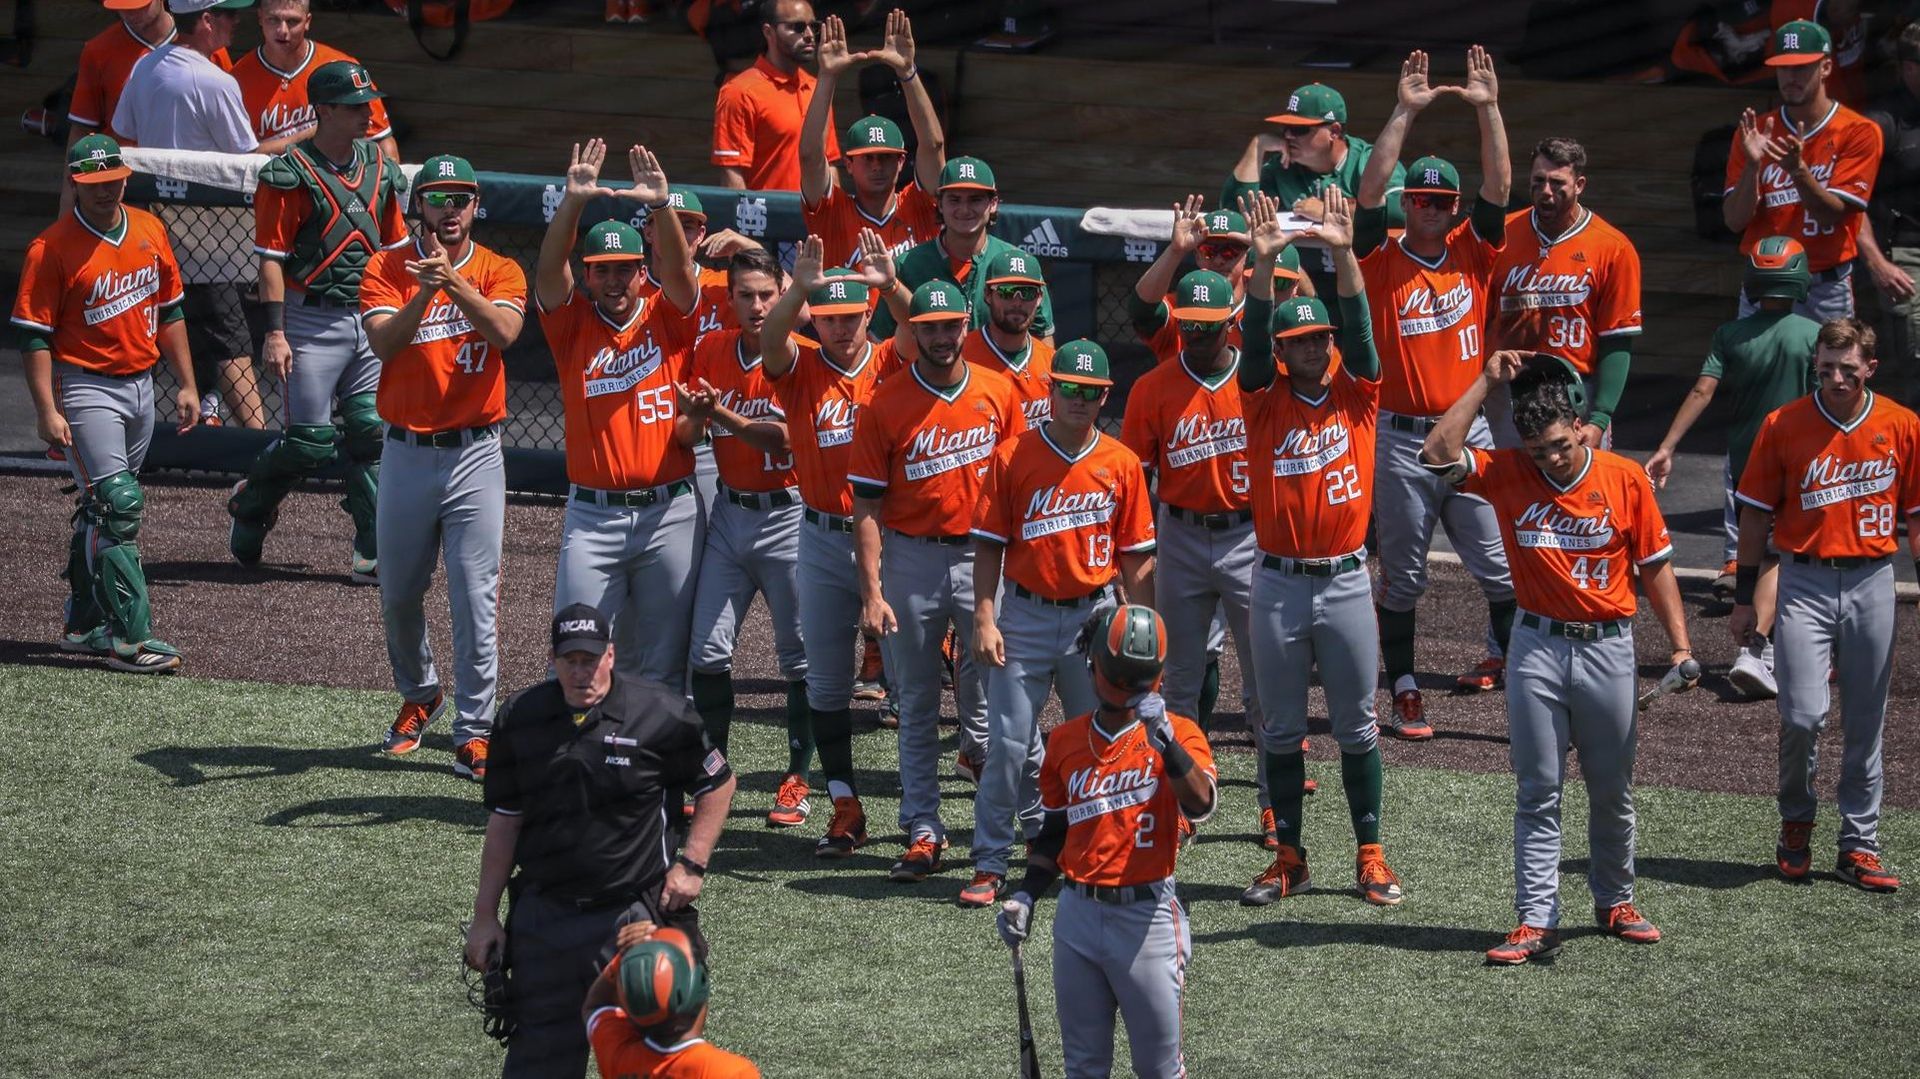 Canes Crush Chippewas in Starkville, 18-3